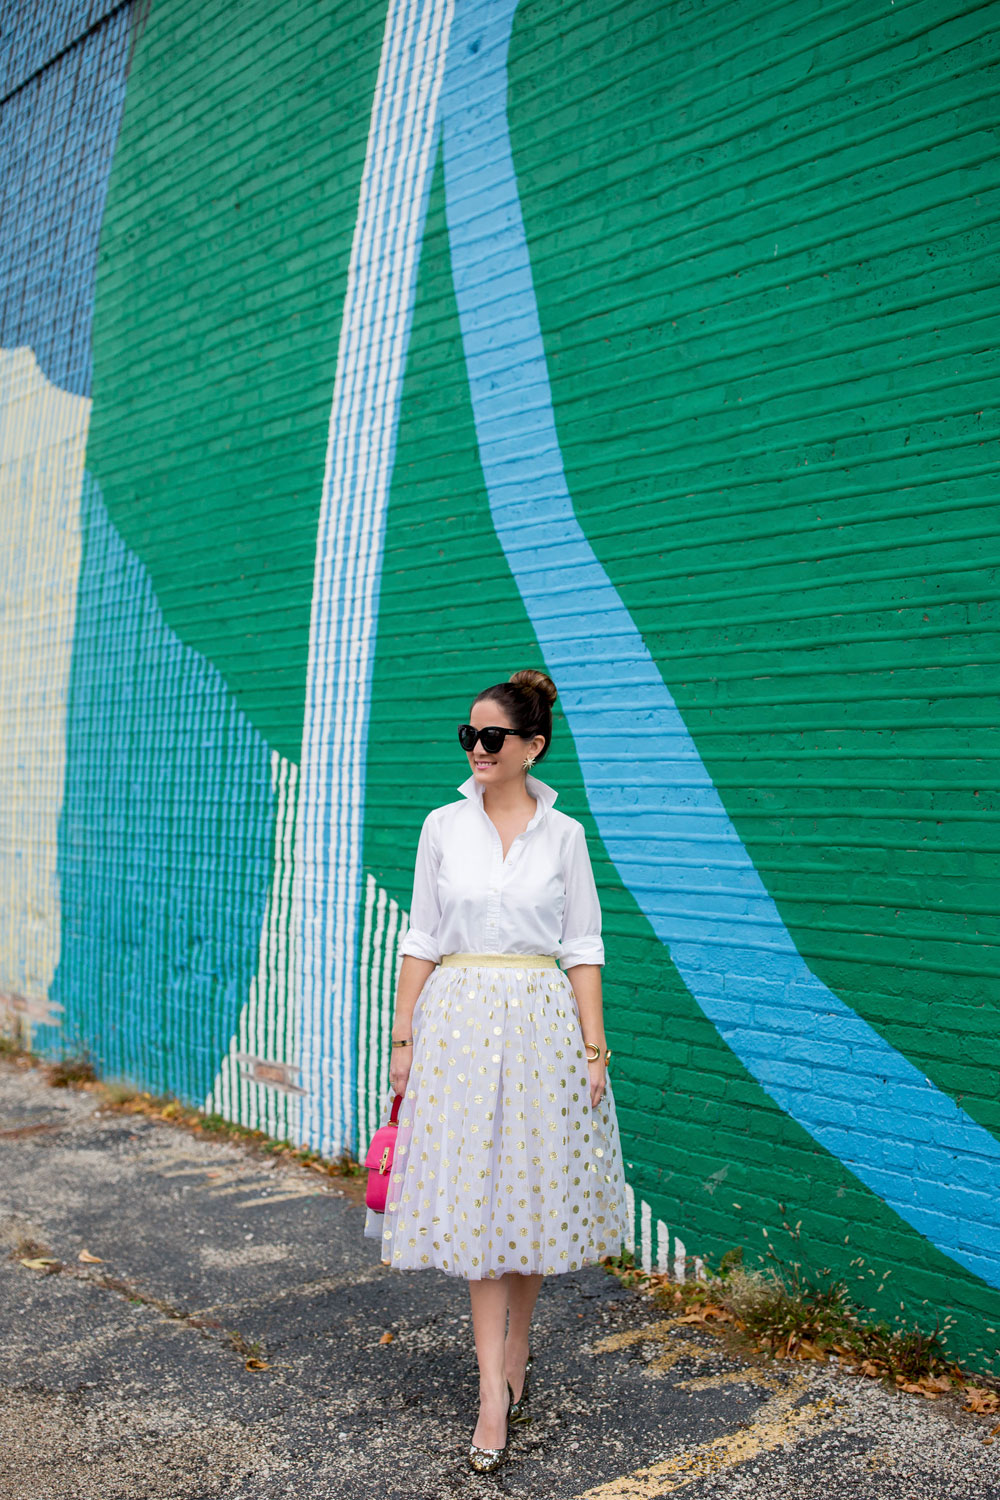 Jennifer Lake Style Charade in a T and J Designs gold glitter polka dot midi skirt, Henri Bendel Uptown Satchel and J Crew sequin pumps at a colorful Chicago mural